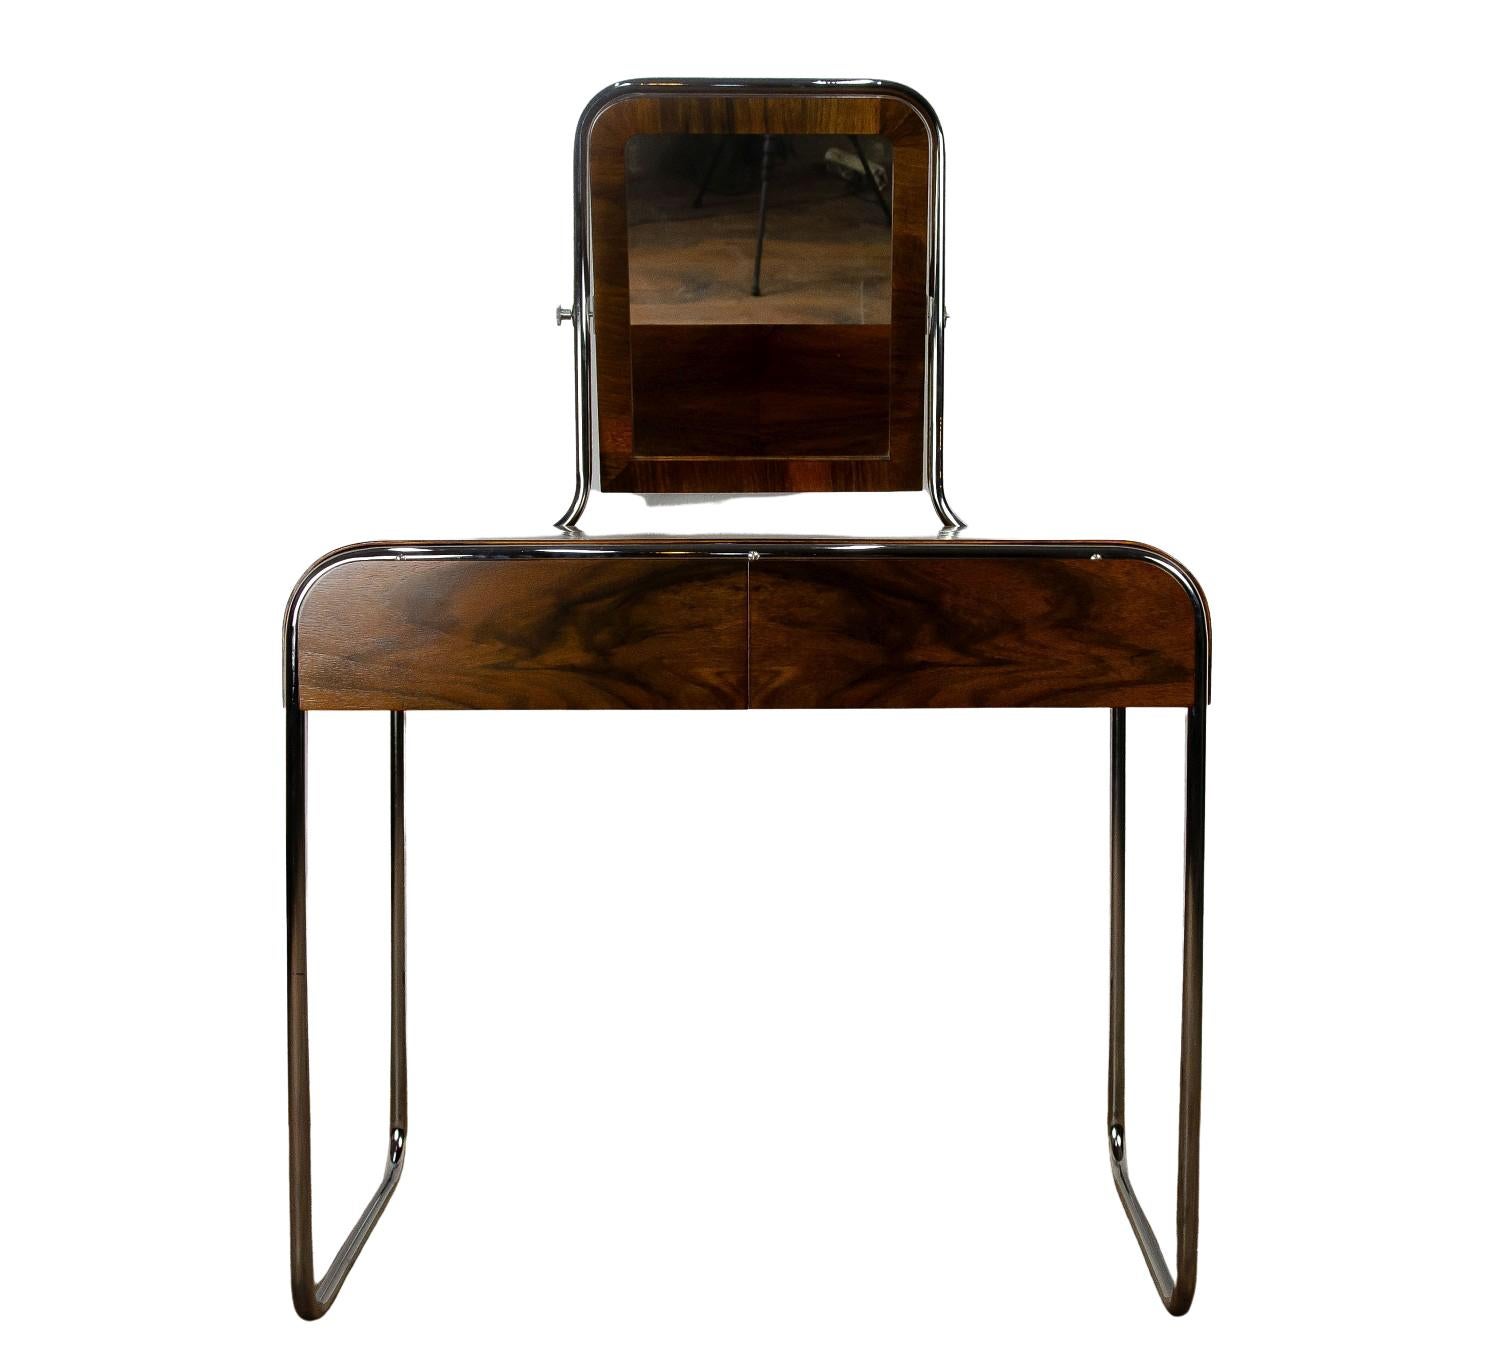 A minimalistic walnut veneered dressing table on a chrome-plated Bauhaus - style structure referring to German Bauhaus.
An extraordinary thing, one of a kind, was created only in a few pieces.
It has two functional compartments and two slim, flat